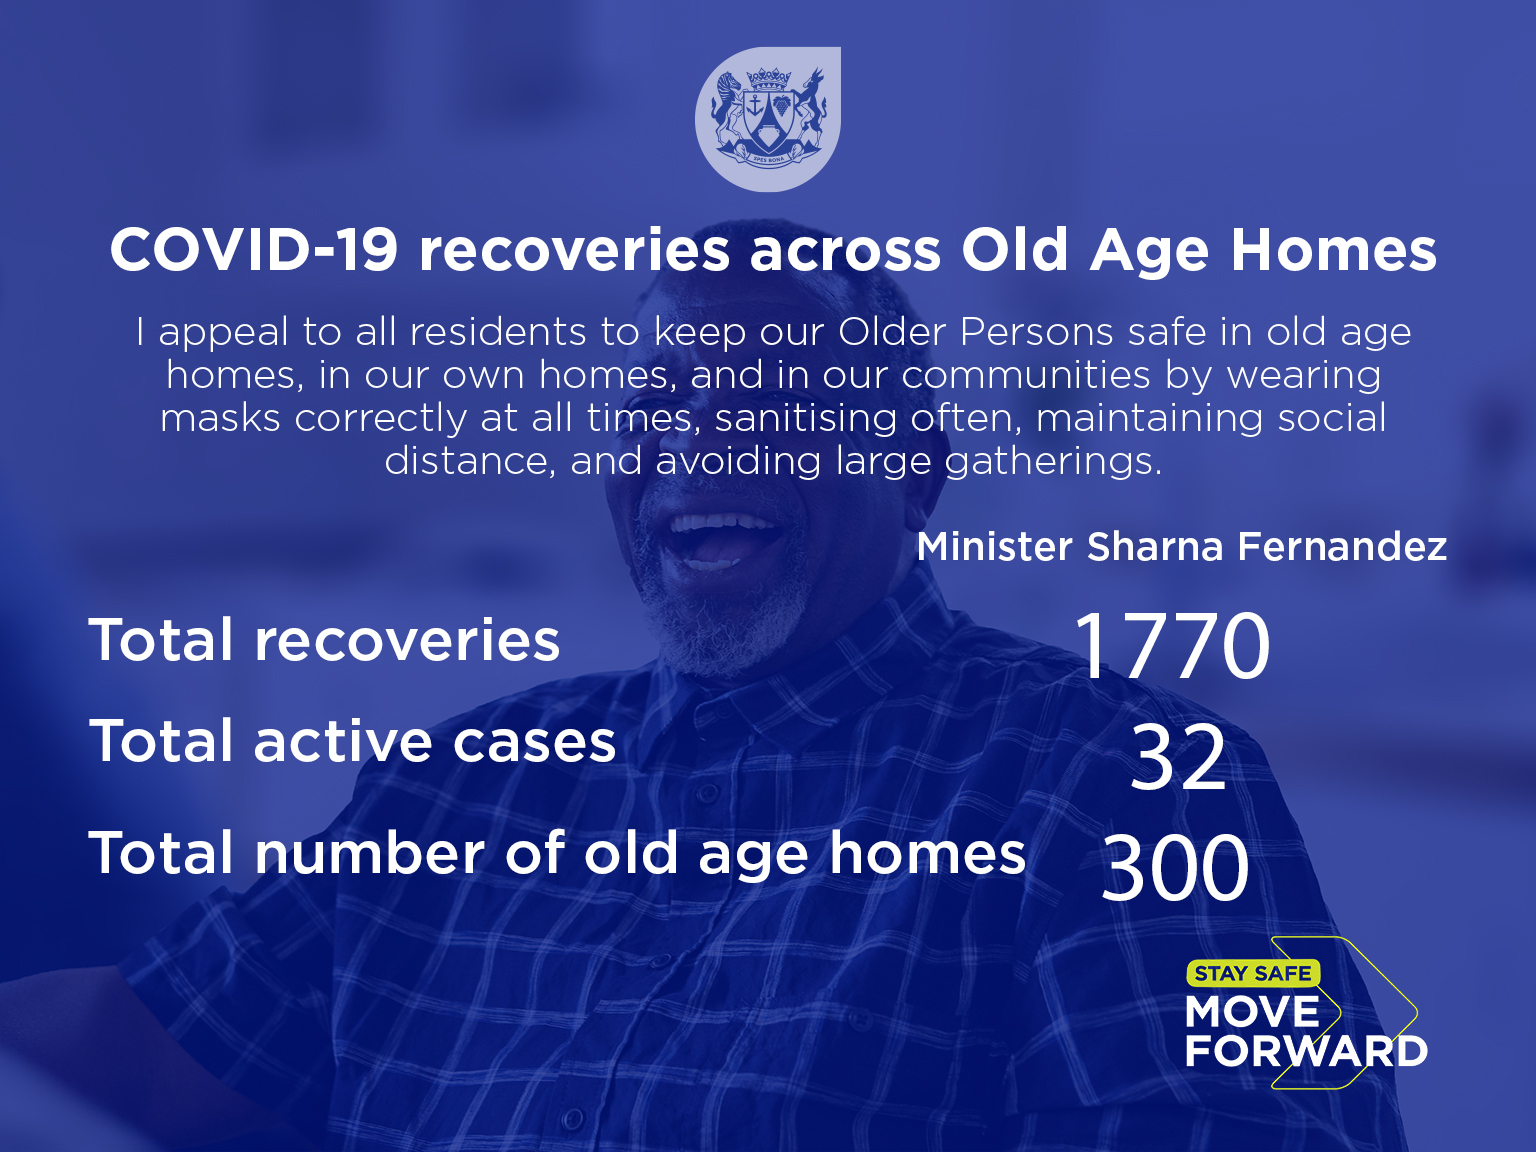 Old Age Home Recoveries